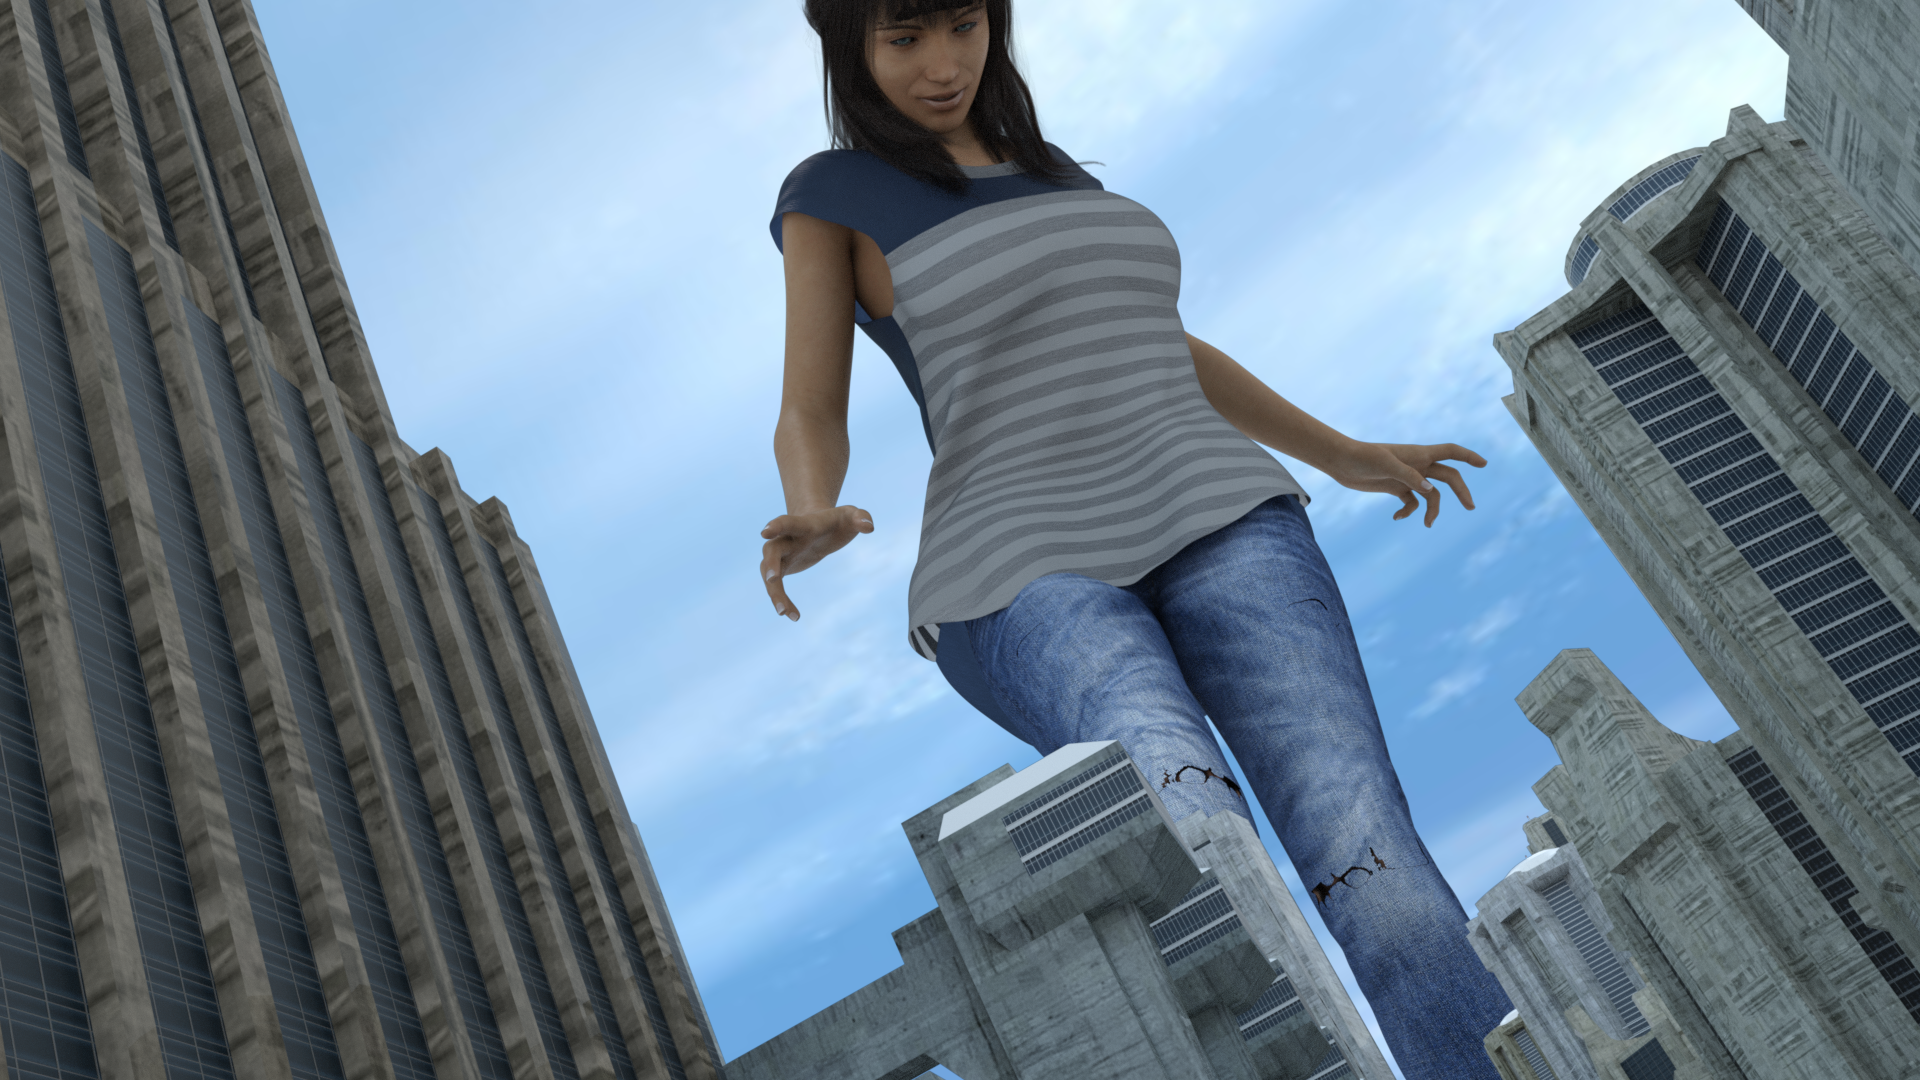 HEAVILY NSFW INTRO giantess fan and "artist" .